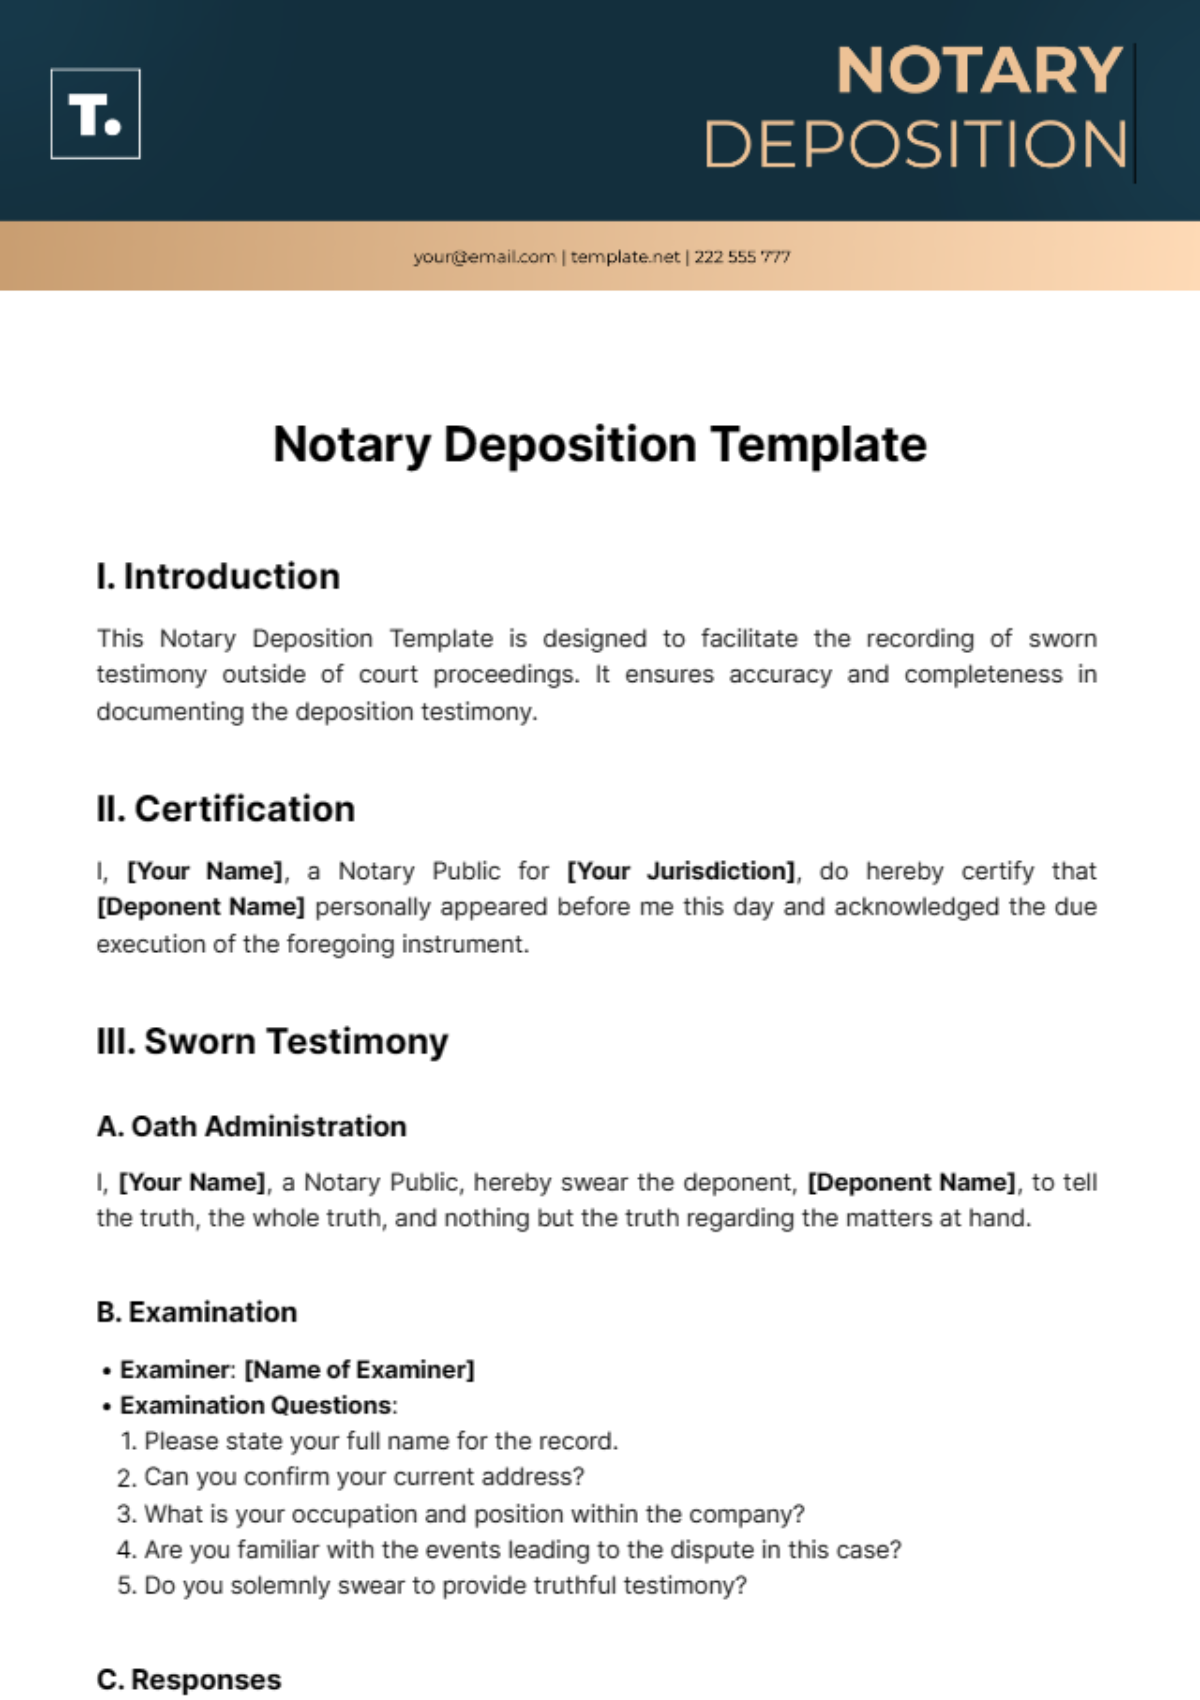 Notary Deposition Template